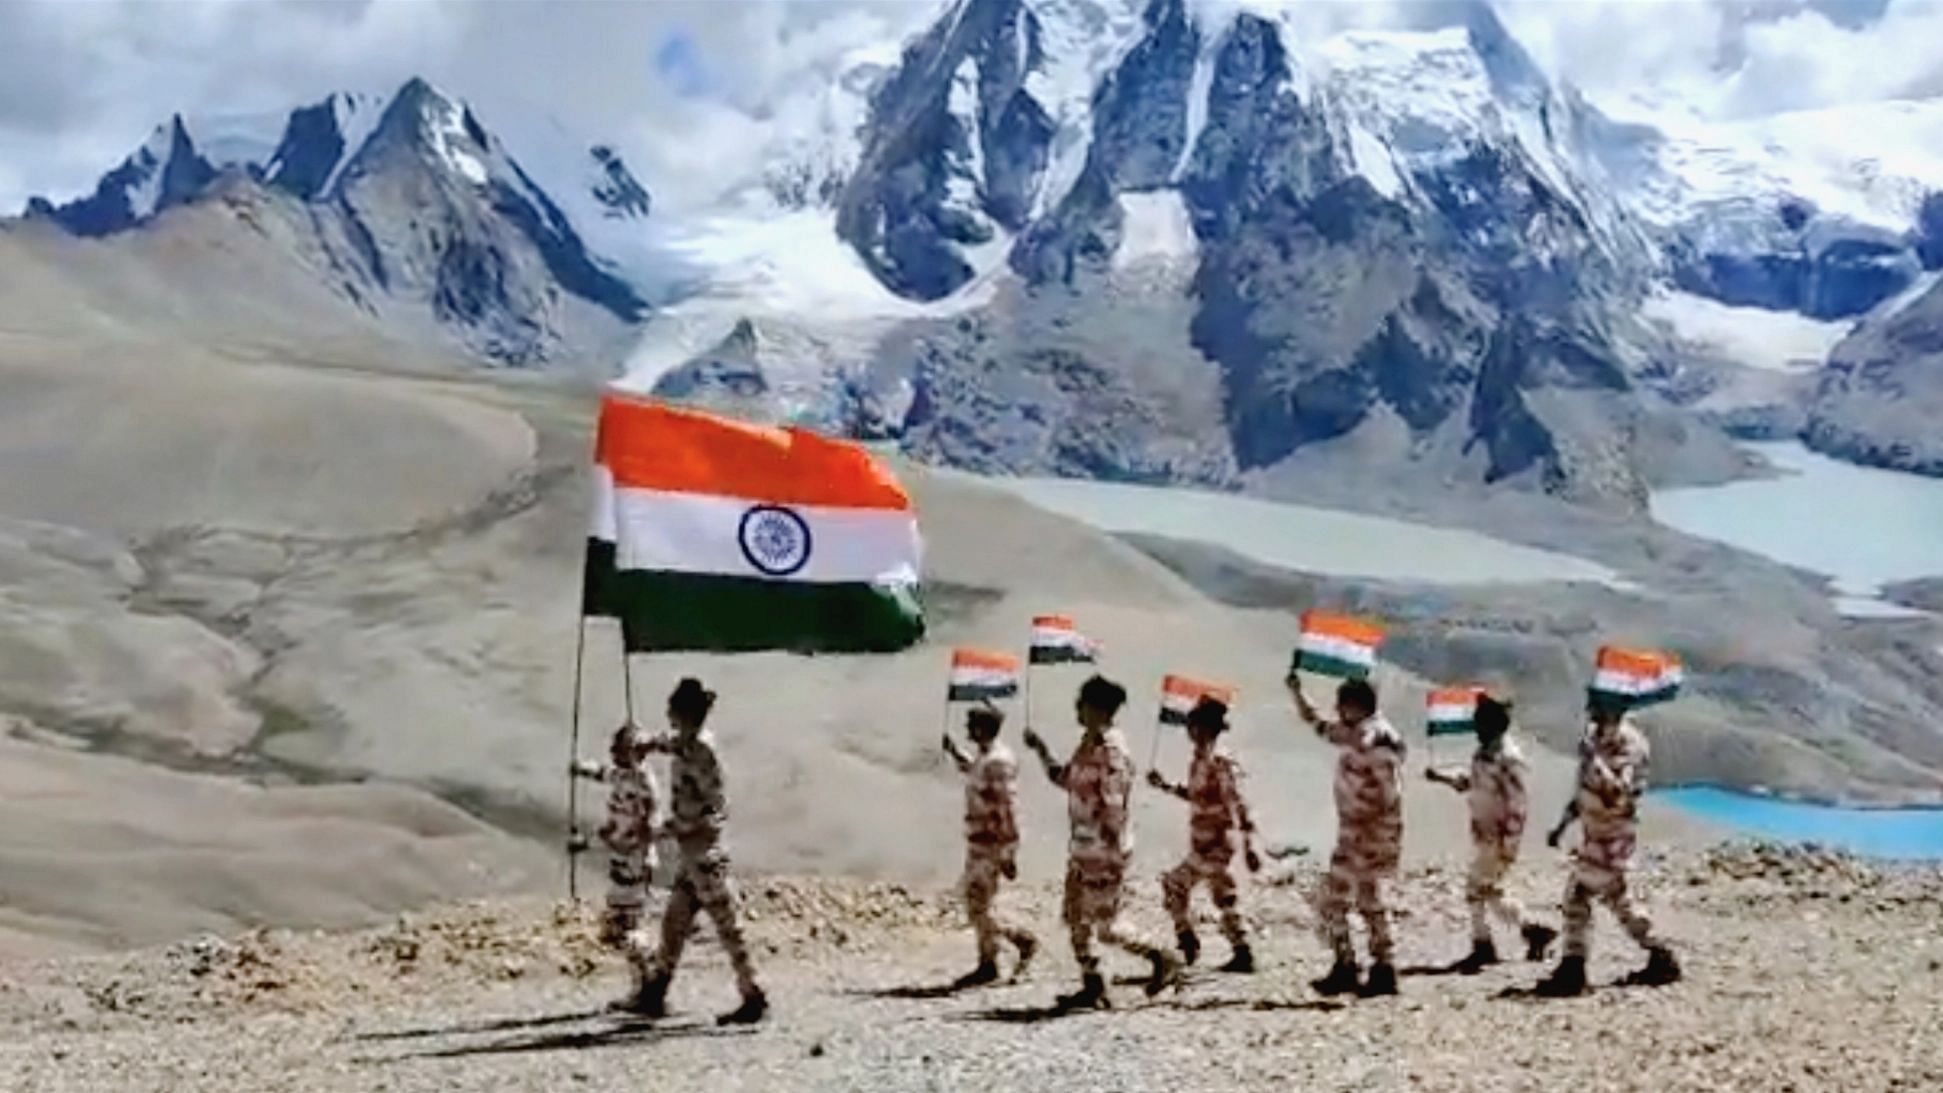 <div class="paragraphs"><p>Indo-Tibetan Border Police (ITBP) celebrate 76th Independence Day, near a mountain peat at 18,800 feet in Sikkim</p><p>Image used for representation only</p></div>